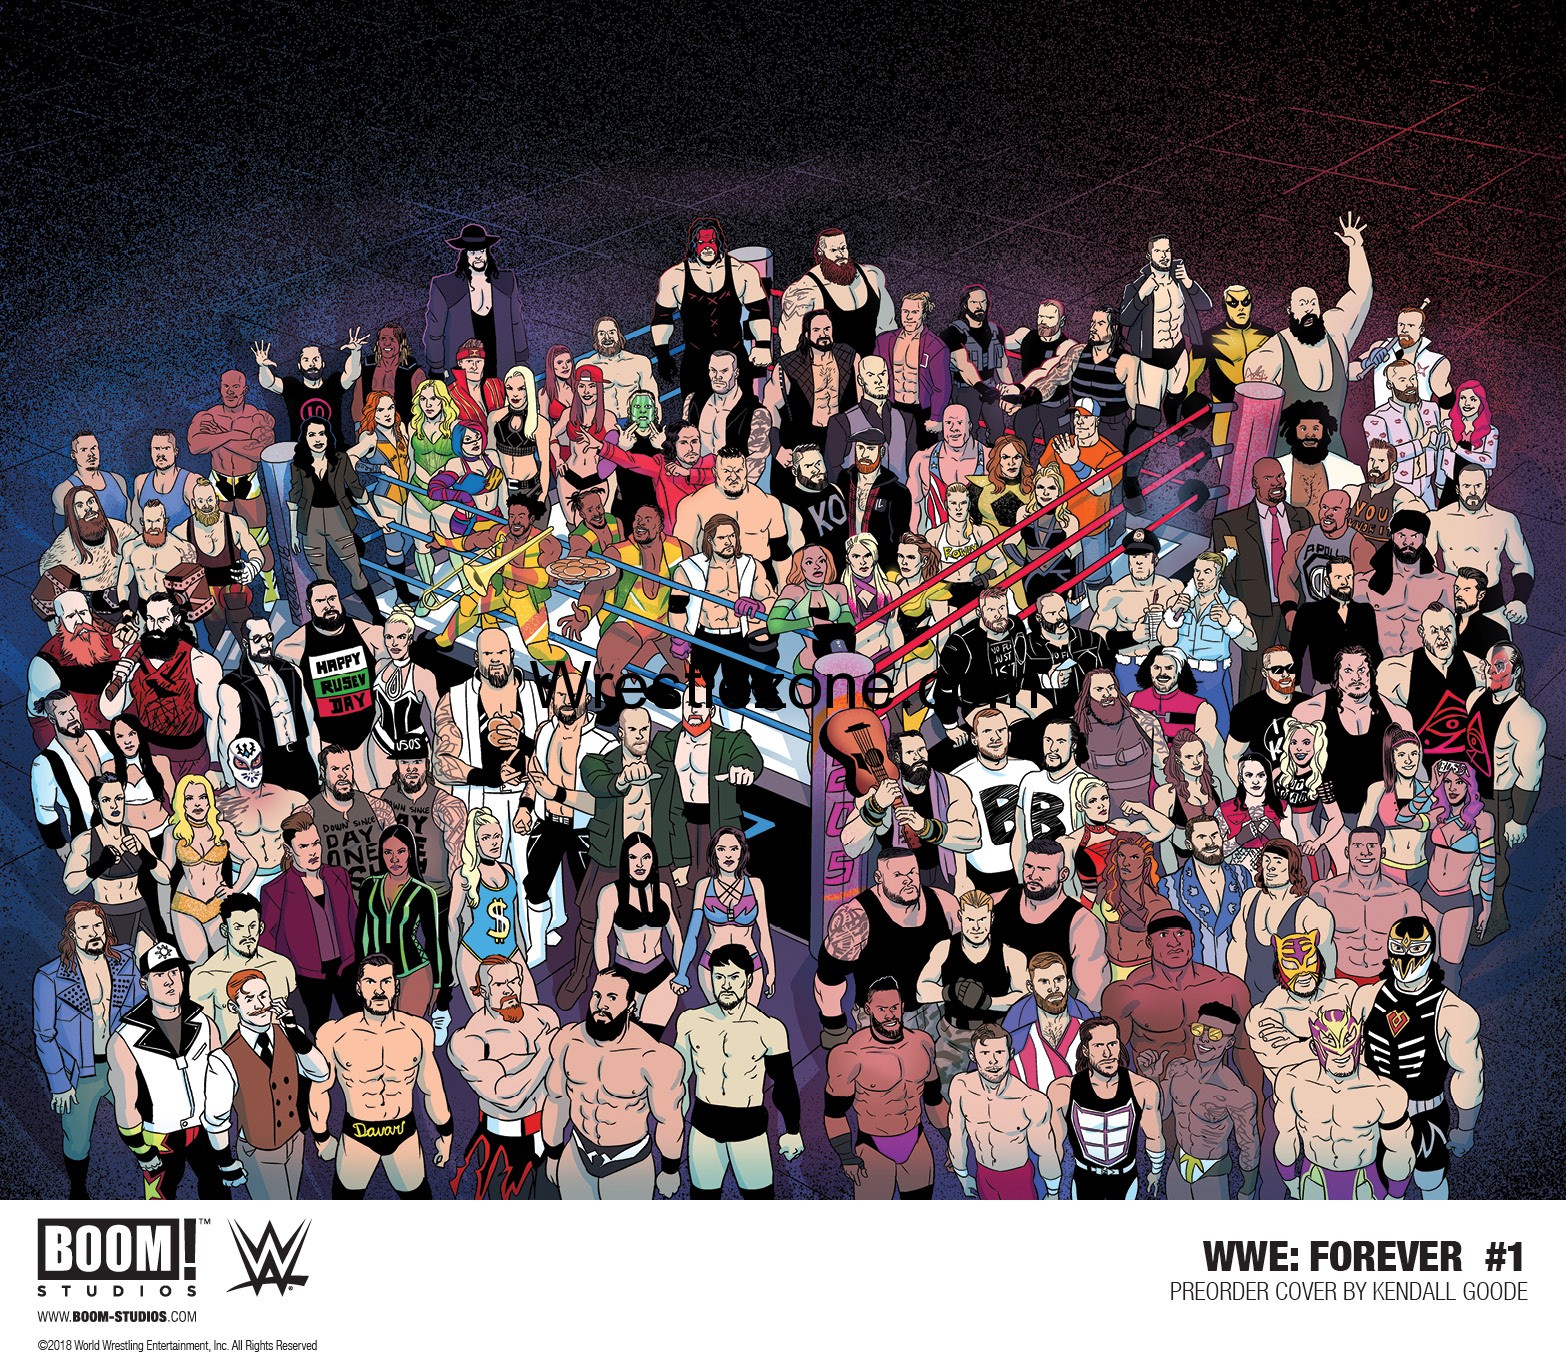 Wwe_forever_001_preorder_promo